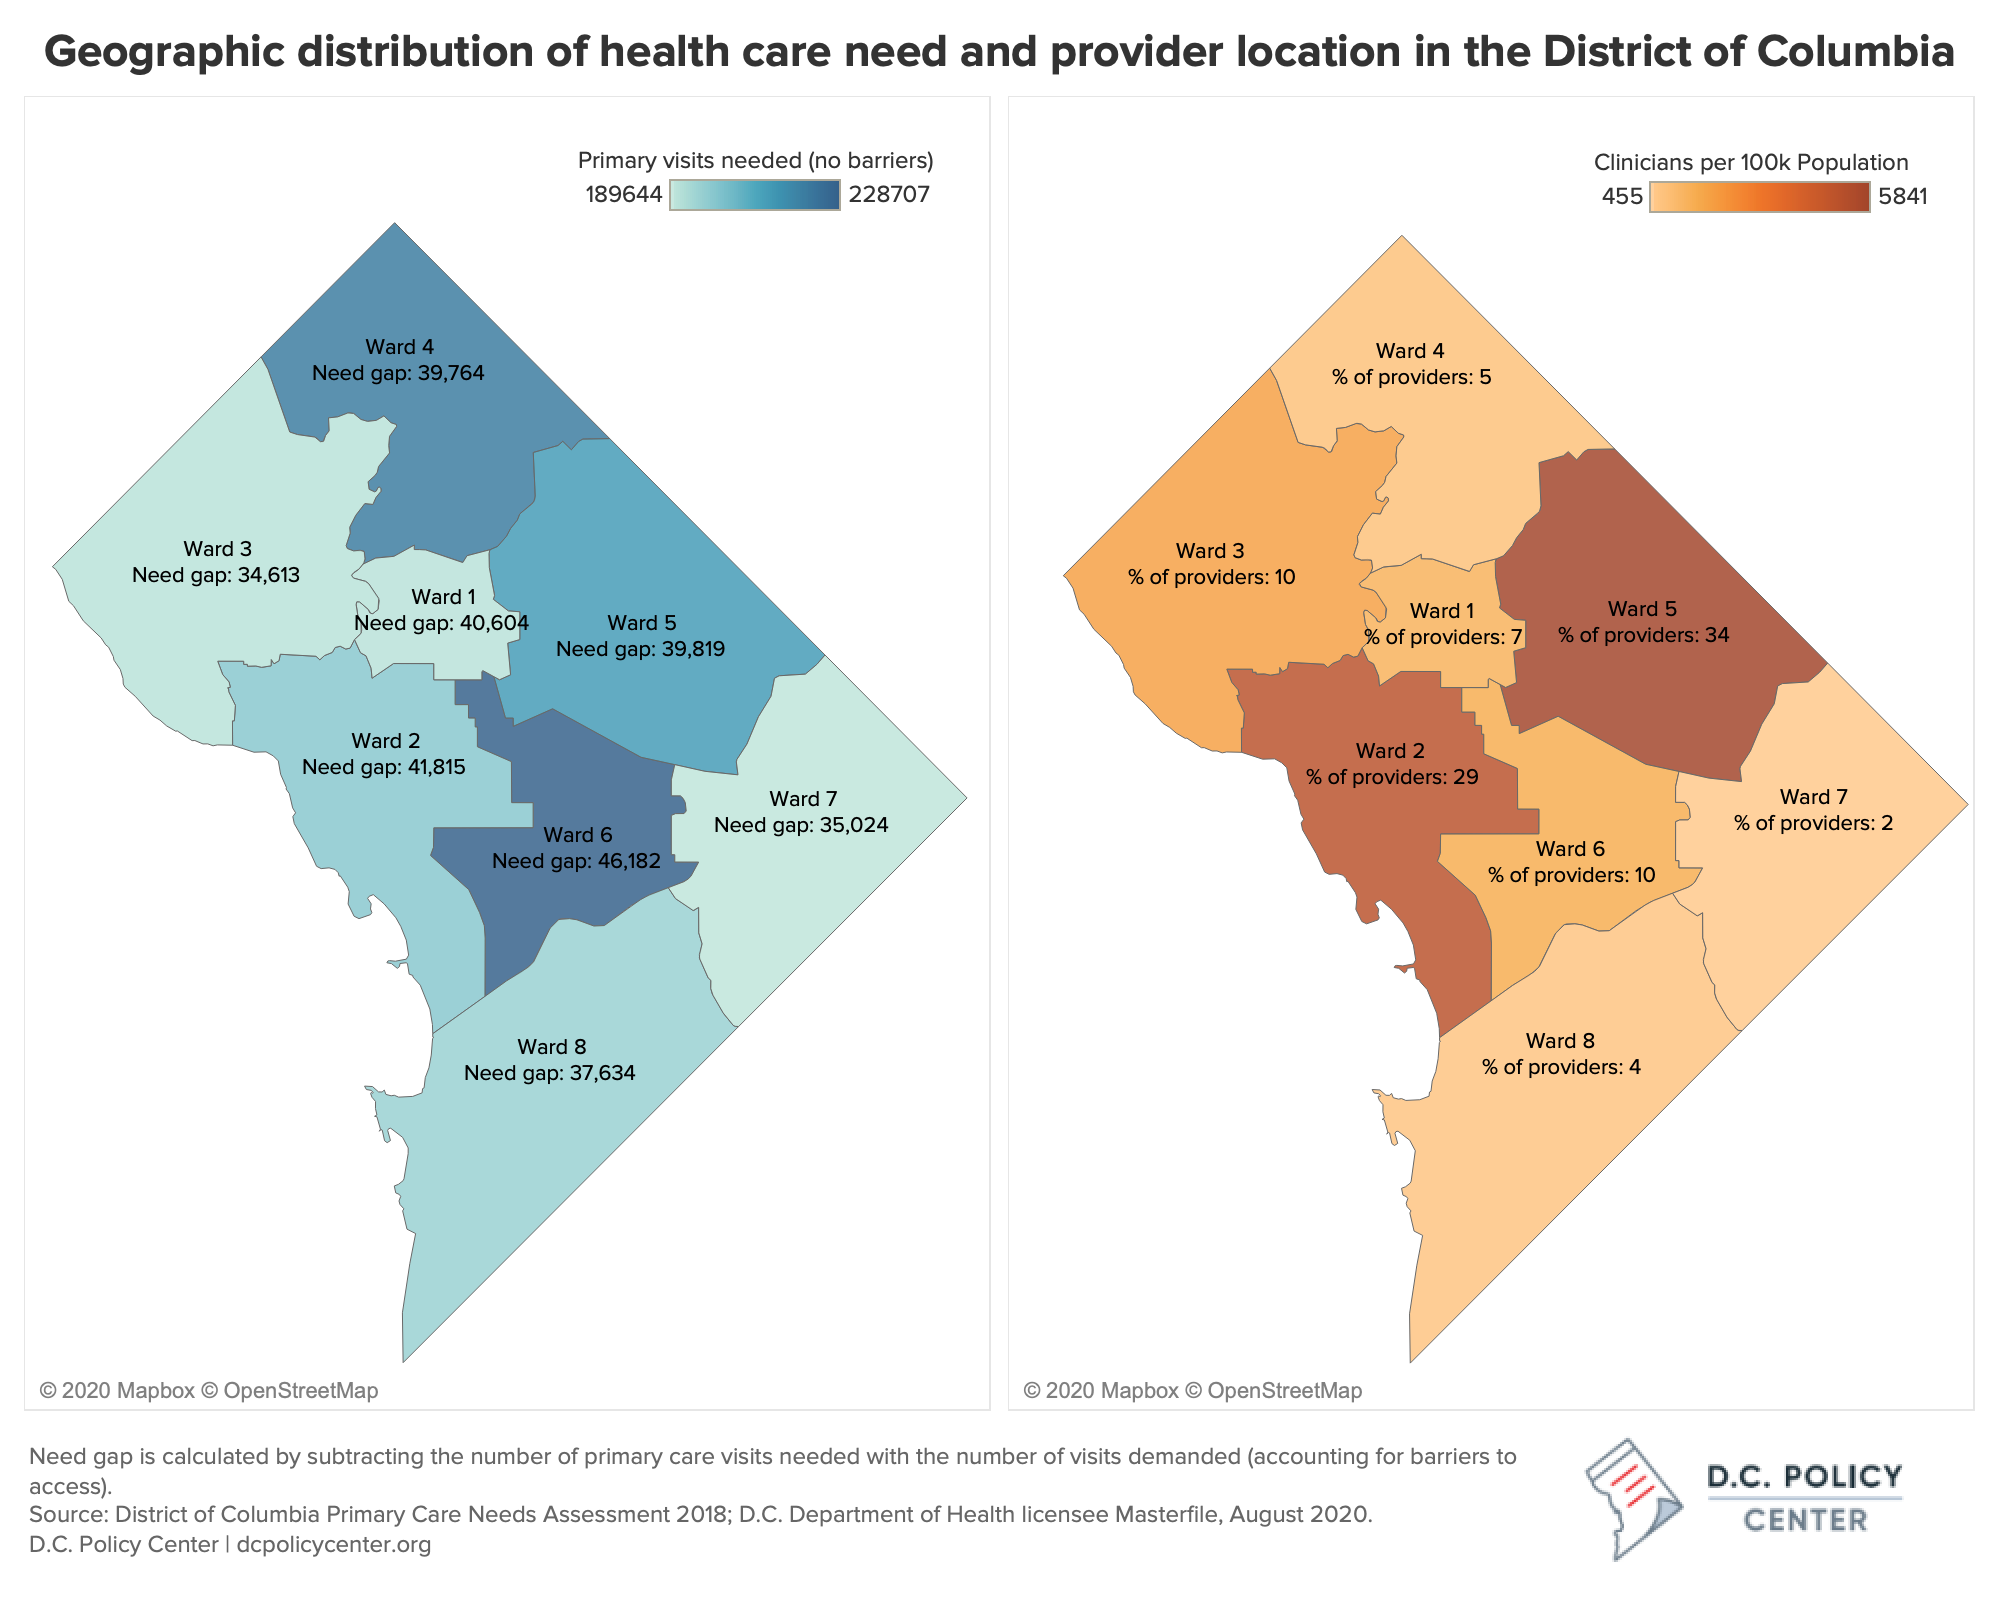 geographic distribution of primary care need and provider location in DC